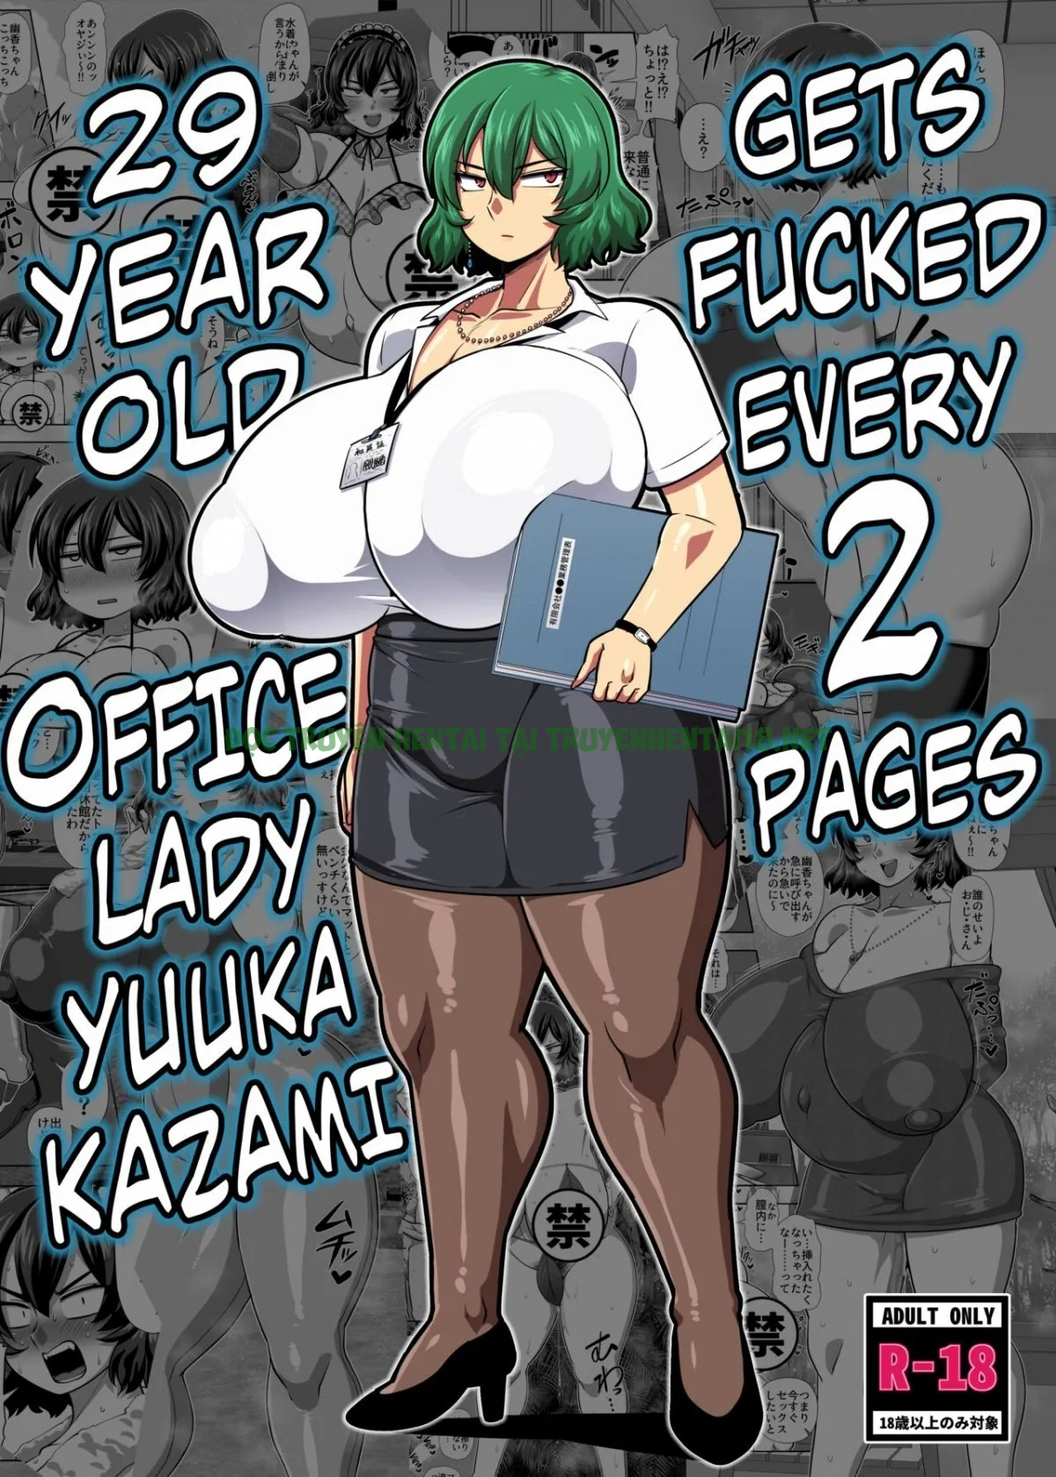 Xem ảnh 29 Year Old Office Lady Yuuka Kazami Gets Fucked Every 2 Pages - One Shot - 2 - Hentai24h.Tv